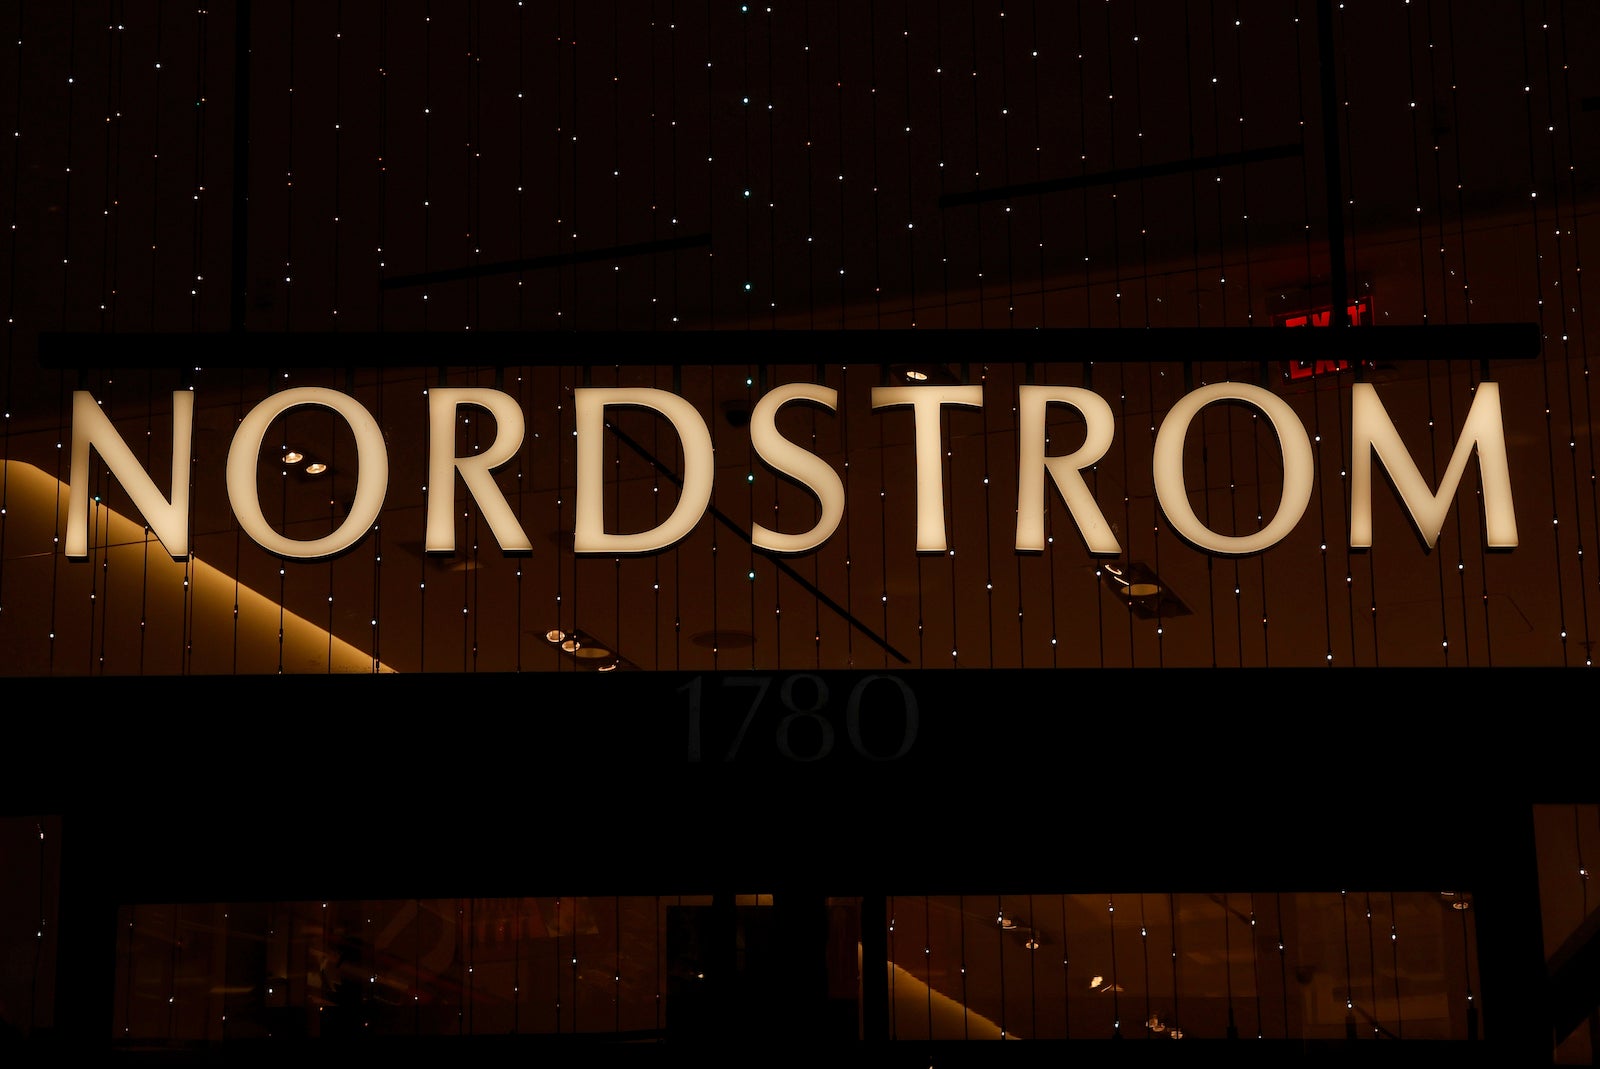 Nordstrom Store in New York City